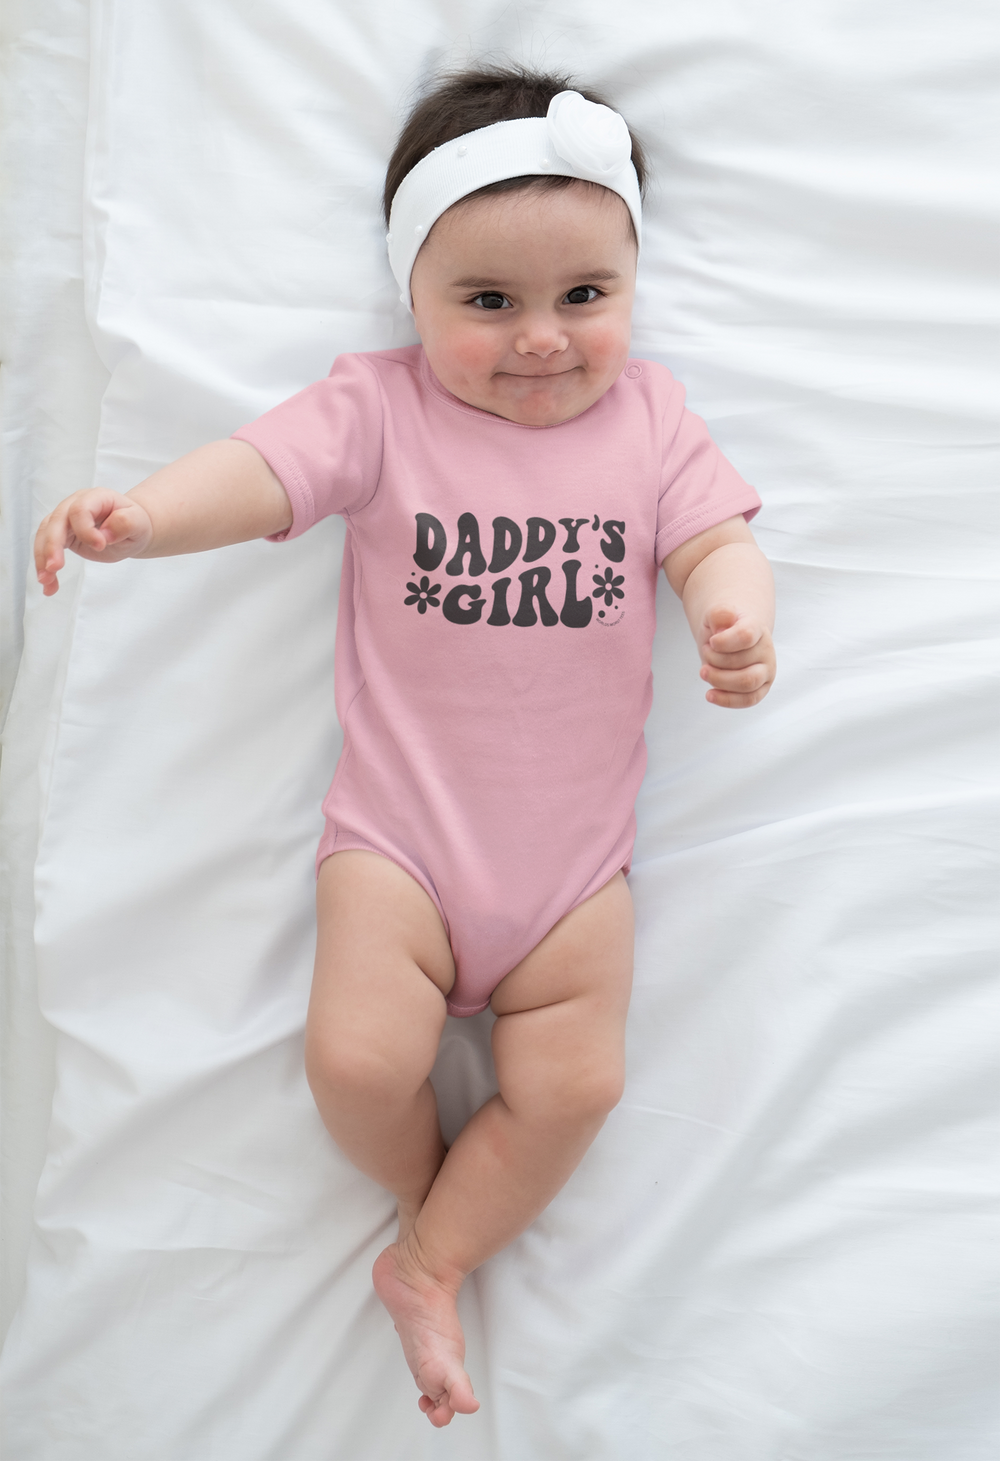 A baby lies on a white surface, wearing a Daddy's Girl Onesie. Close-ups show the infant's head, hand, foot, and nose. This fine jersey bodysuit is 100% cotton, featuring ribbed knitting for durability and plastic snaps for easy changing access.